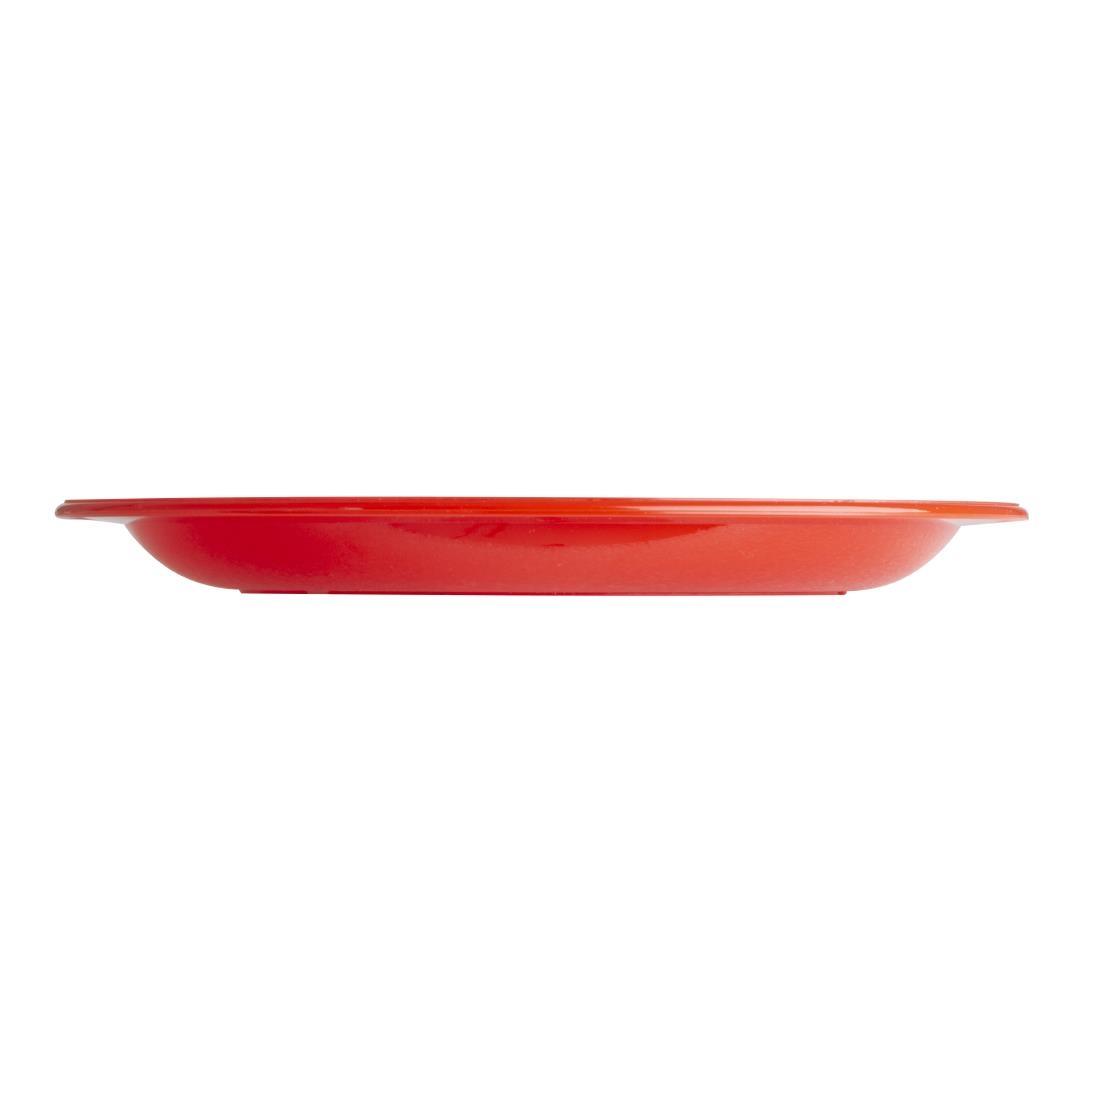 Olympia Kristallon Polycarbonate Plates Red 172mm (Pack of 12) - CB766  - 2